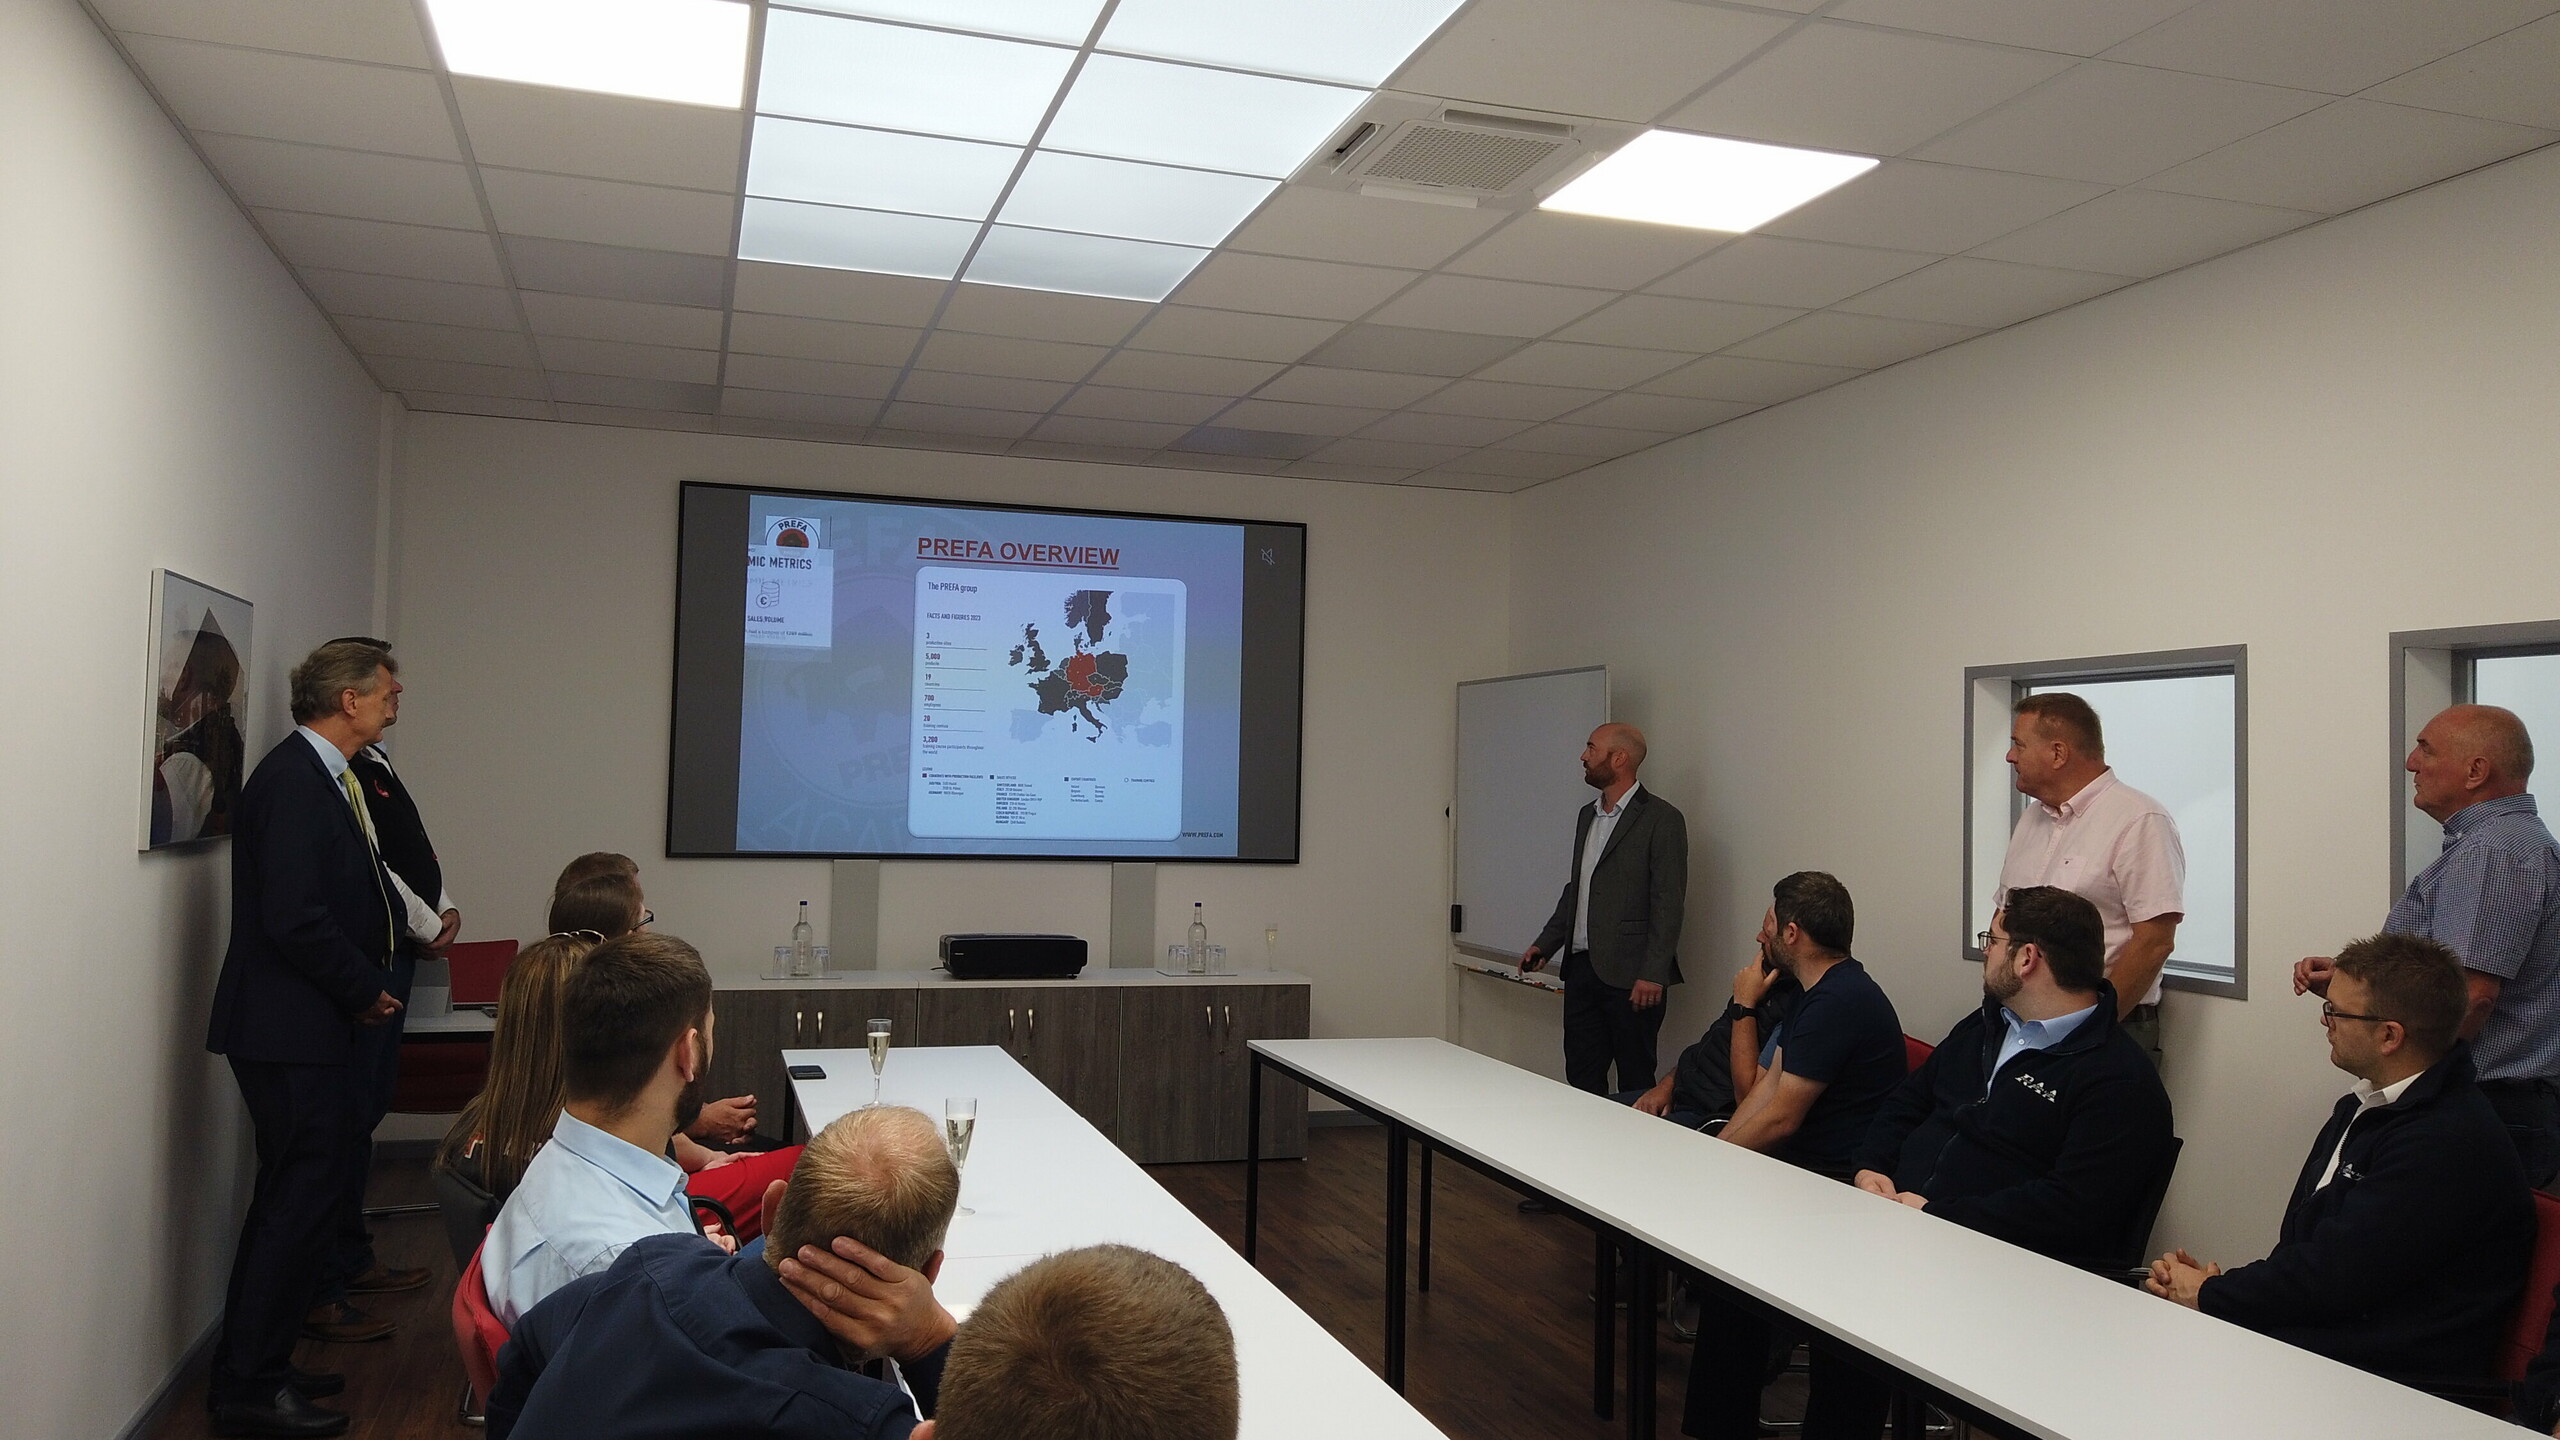 Photo from the opening presentation of the new Academy in the UK. Spectators sit at a table and watch the presentation.